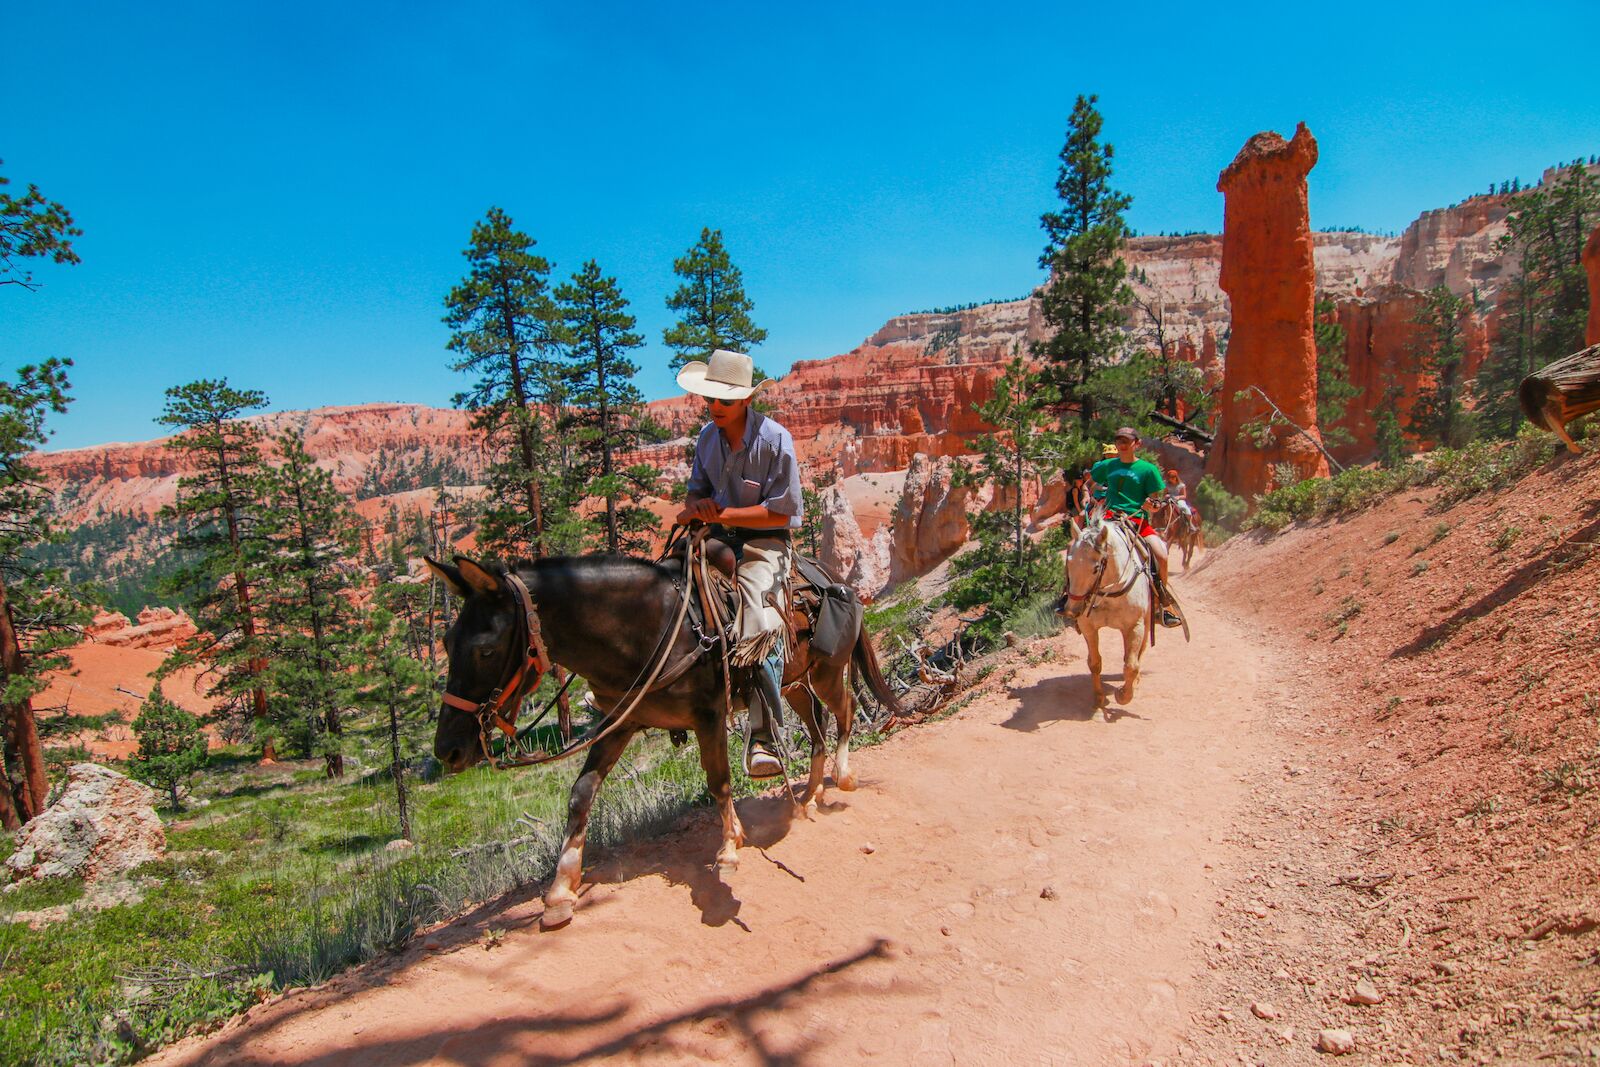 BRYCE CANYON, UTAH - June 27, 207: People riding on horses on the hiking trails in Bryce Canyon National Park on September 3, 2015. Horse riding tour are popular by tourist in the Bryce Canyon.